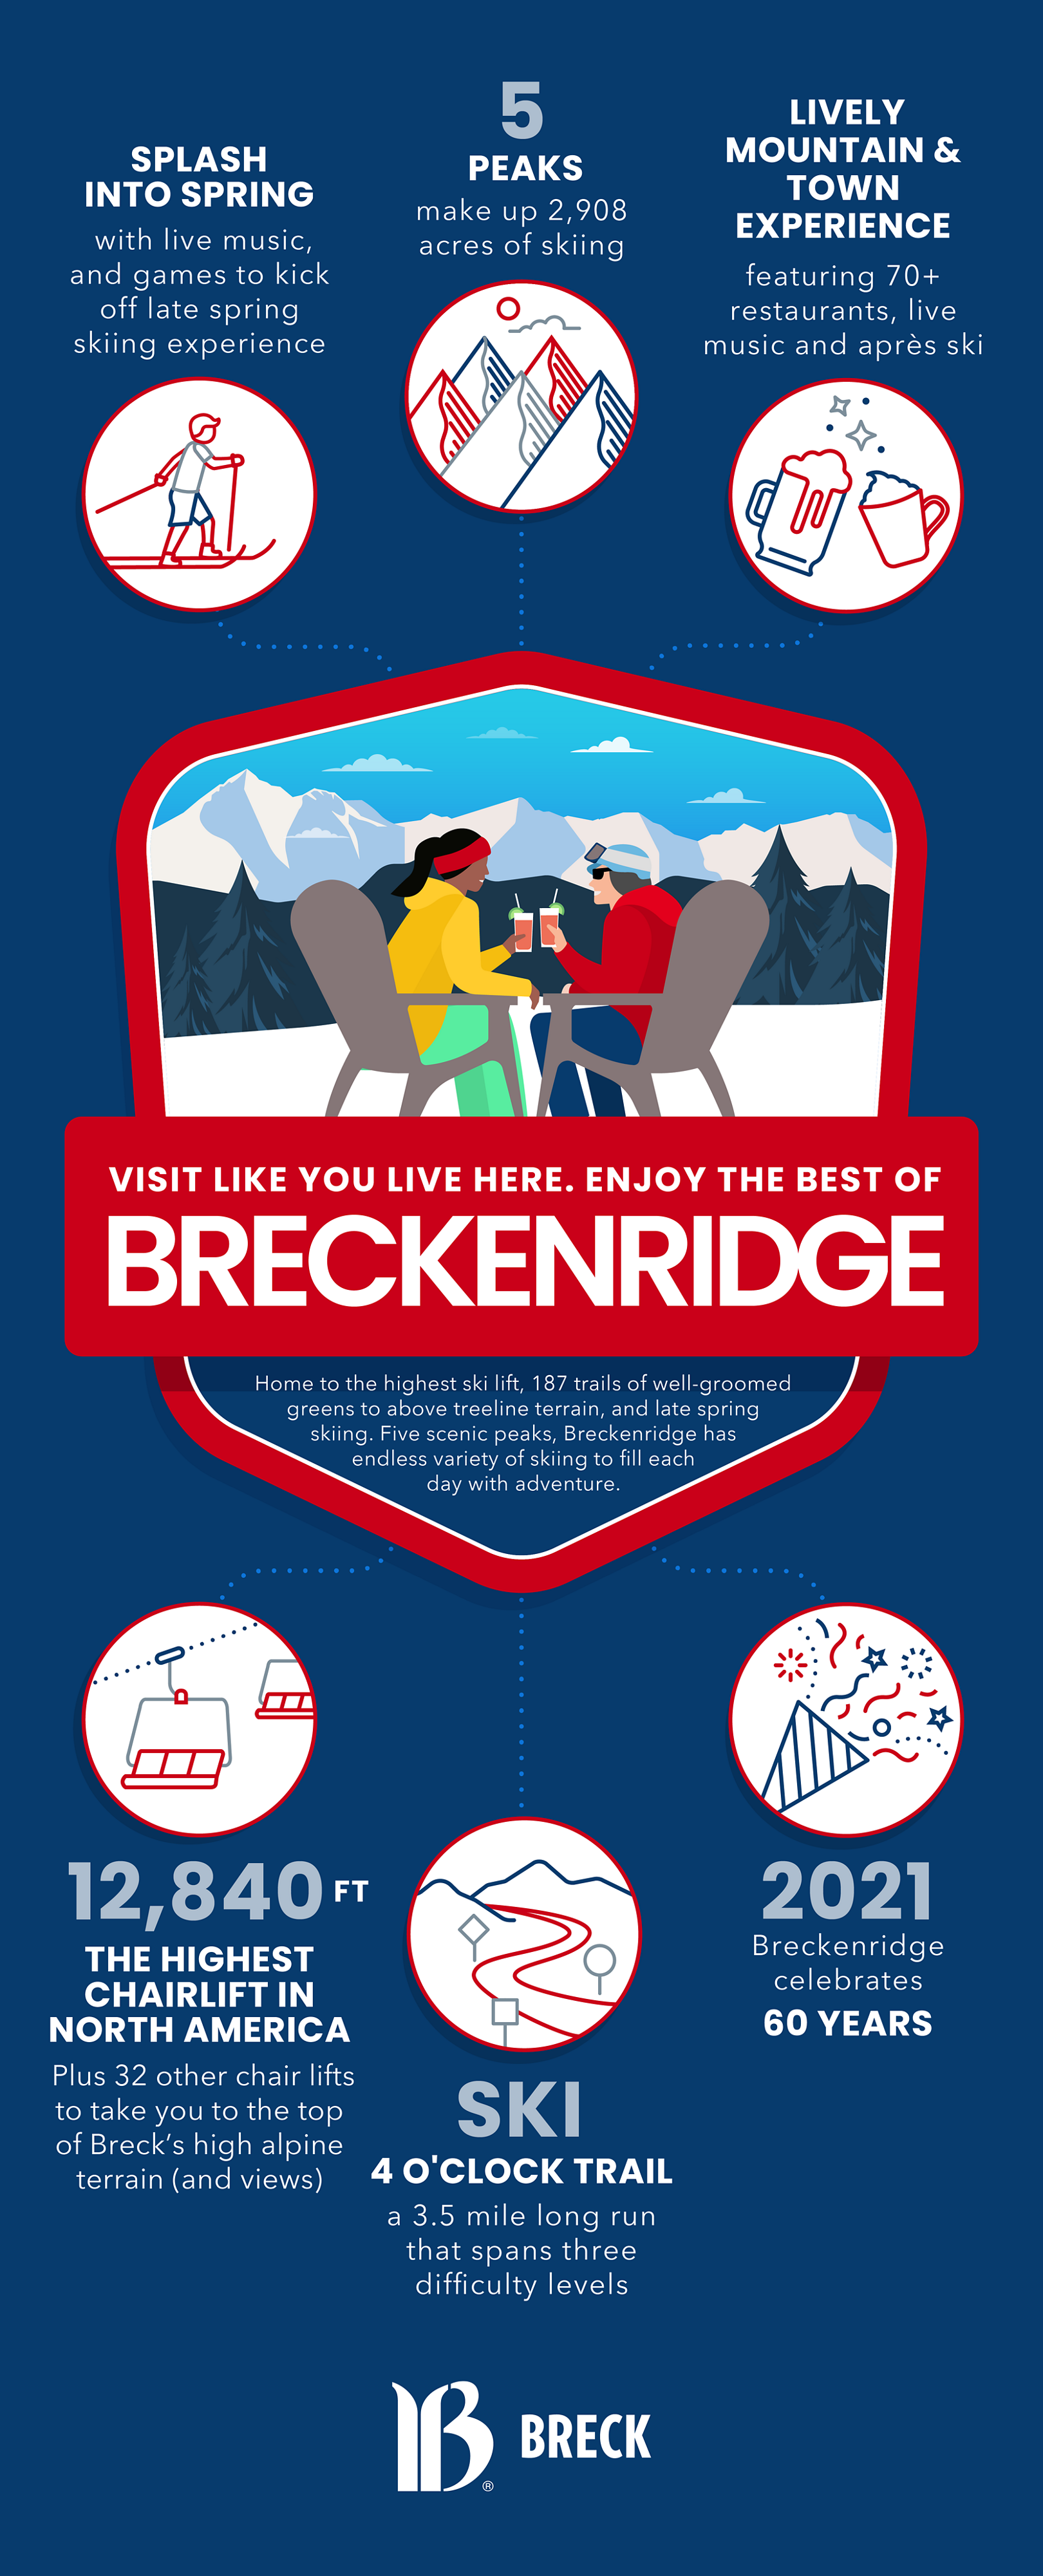 An infographic about Breckenridge Resort, including key facts like 70+ restaurants in the living après scene, 3.5 mile long trail called 4 o'clock that spans 3 difficulty levels, 32 chair lifts, 5 peaks, and a living spring skiing experience.